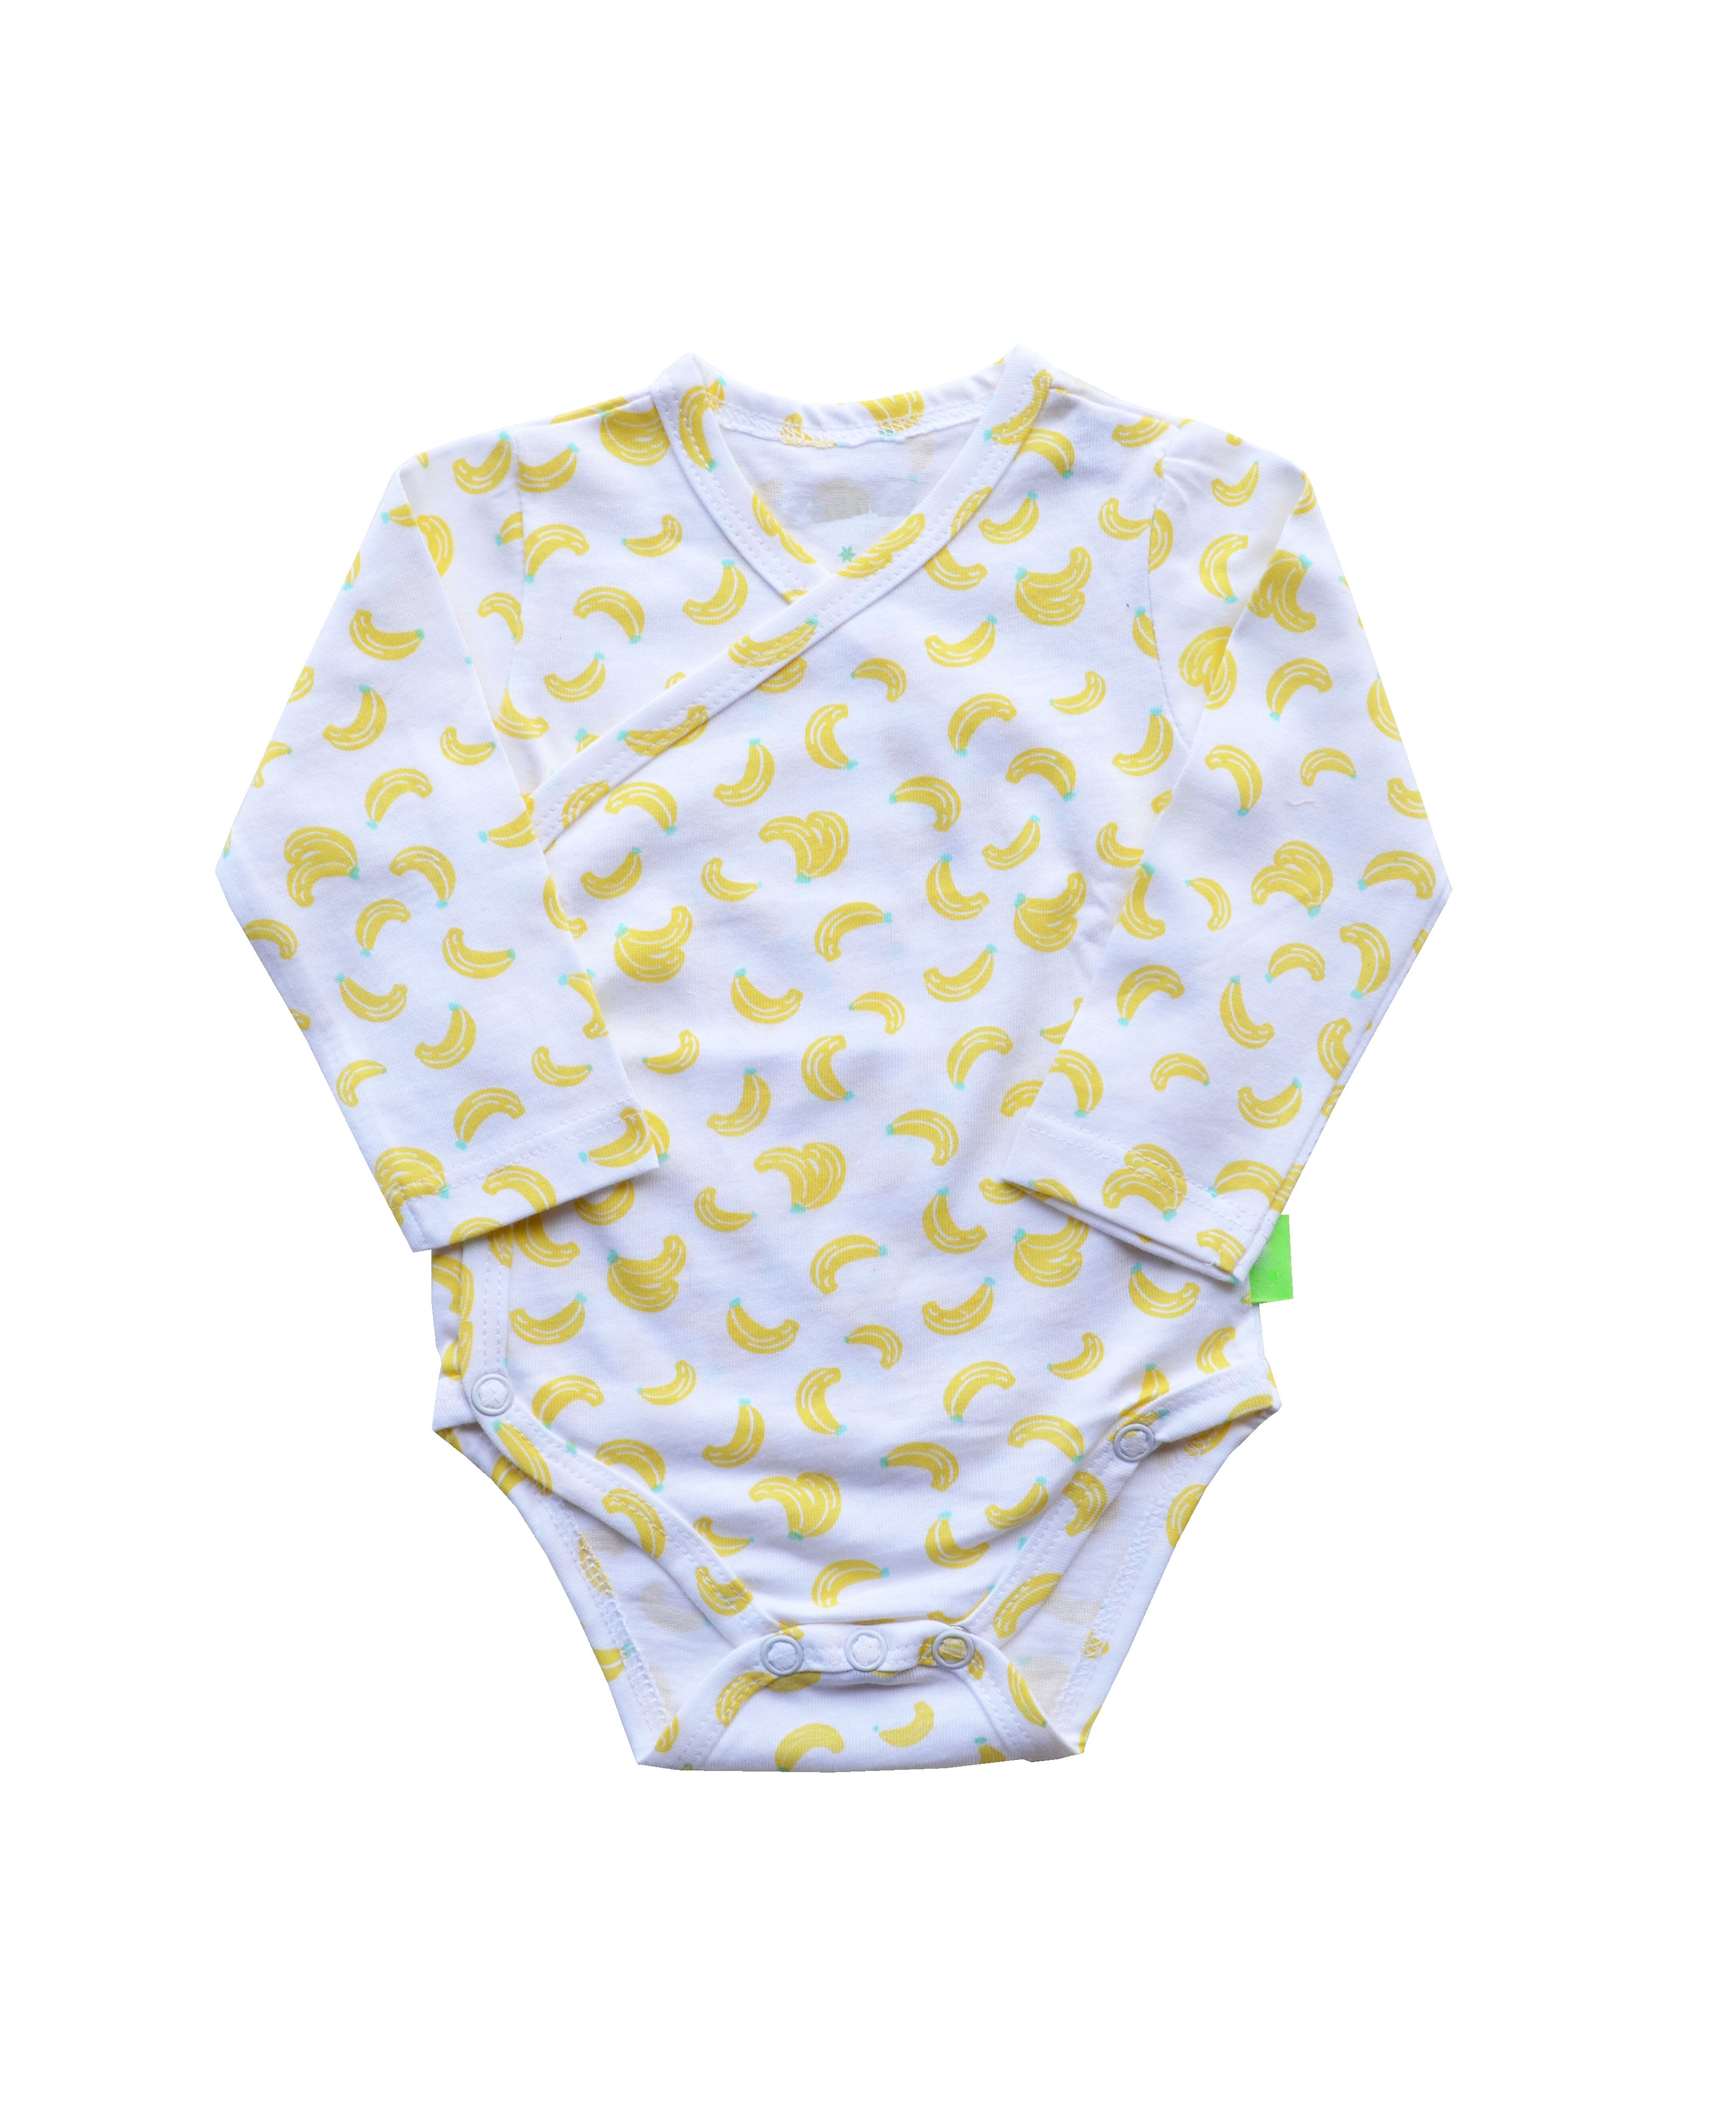 White Long Sleeve  Rompers/Onesie with Allover Banana Print (100% Cotton Single Jersey)